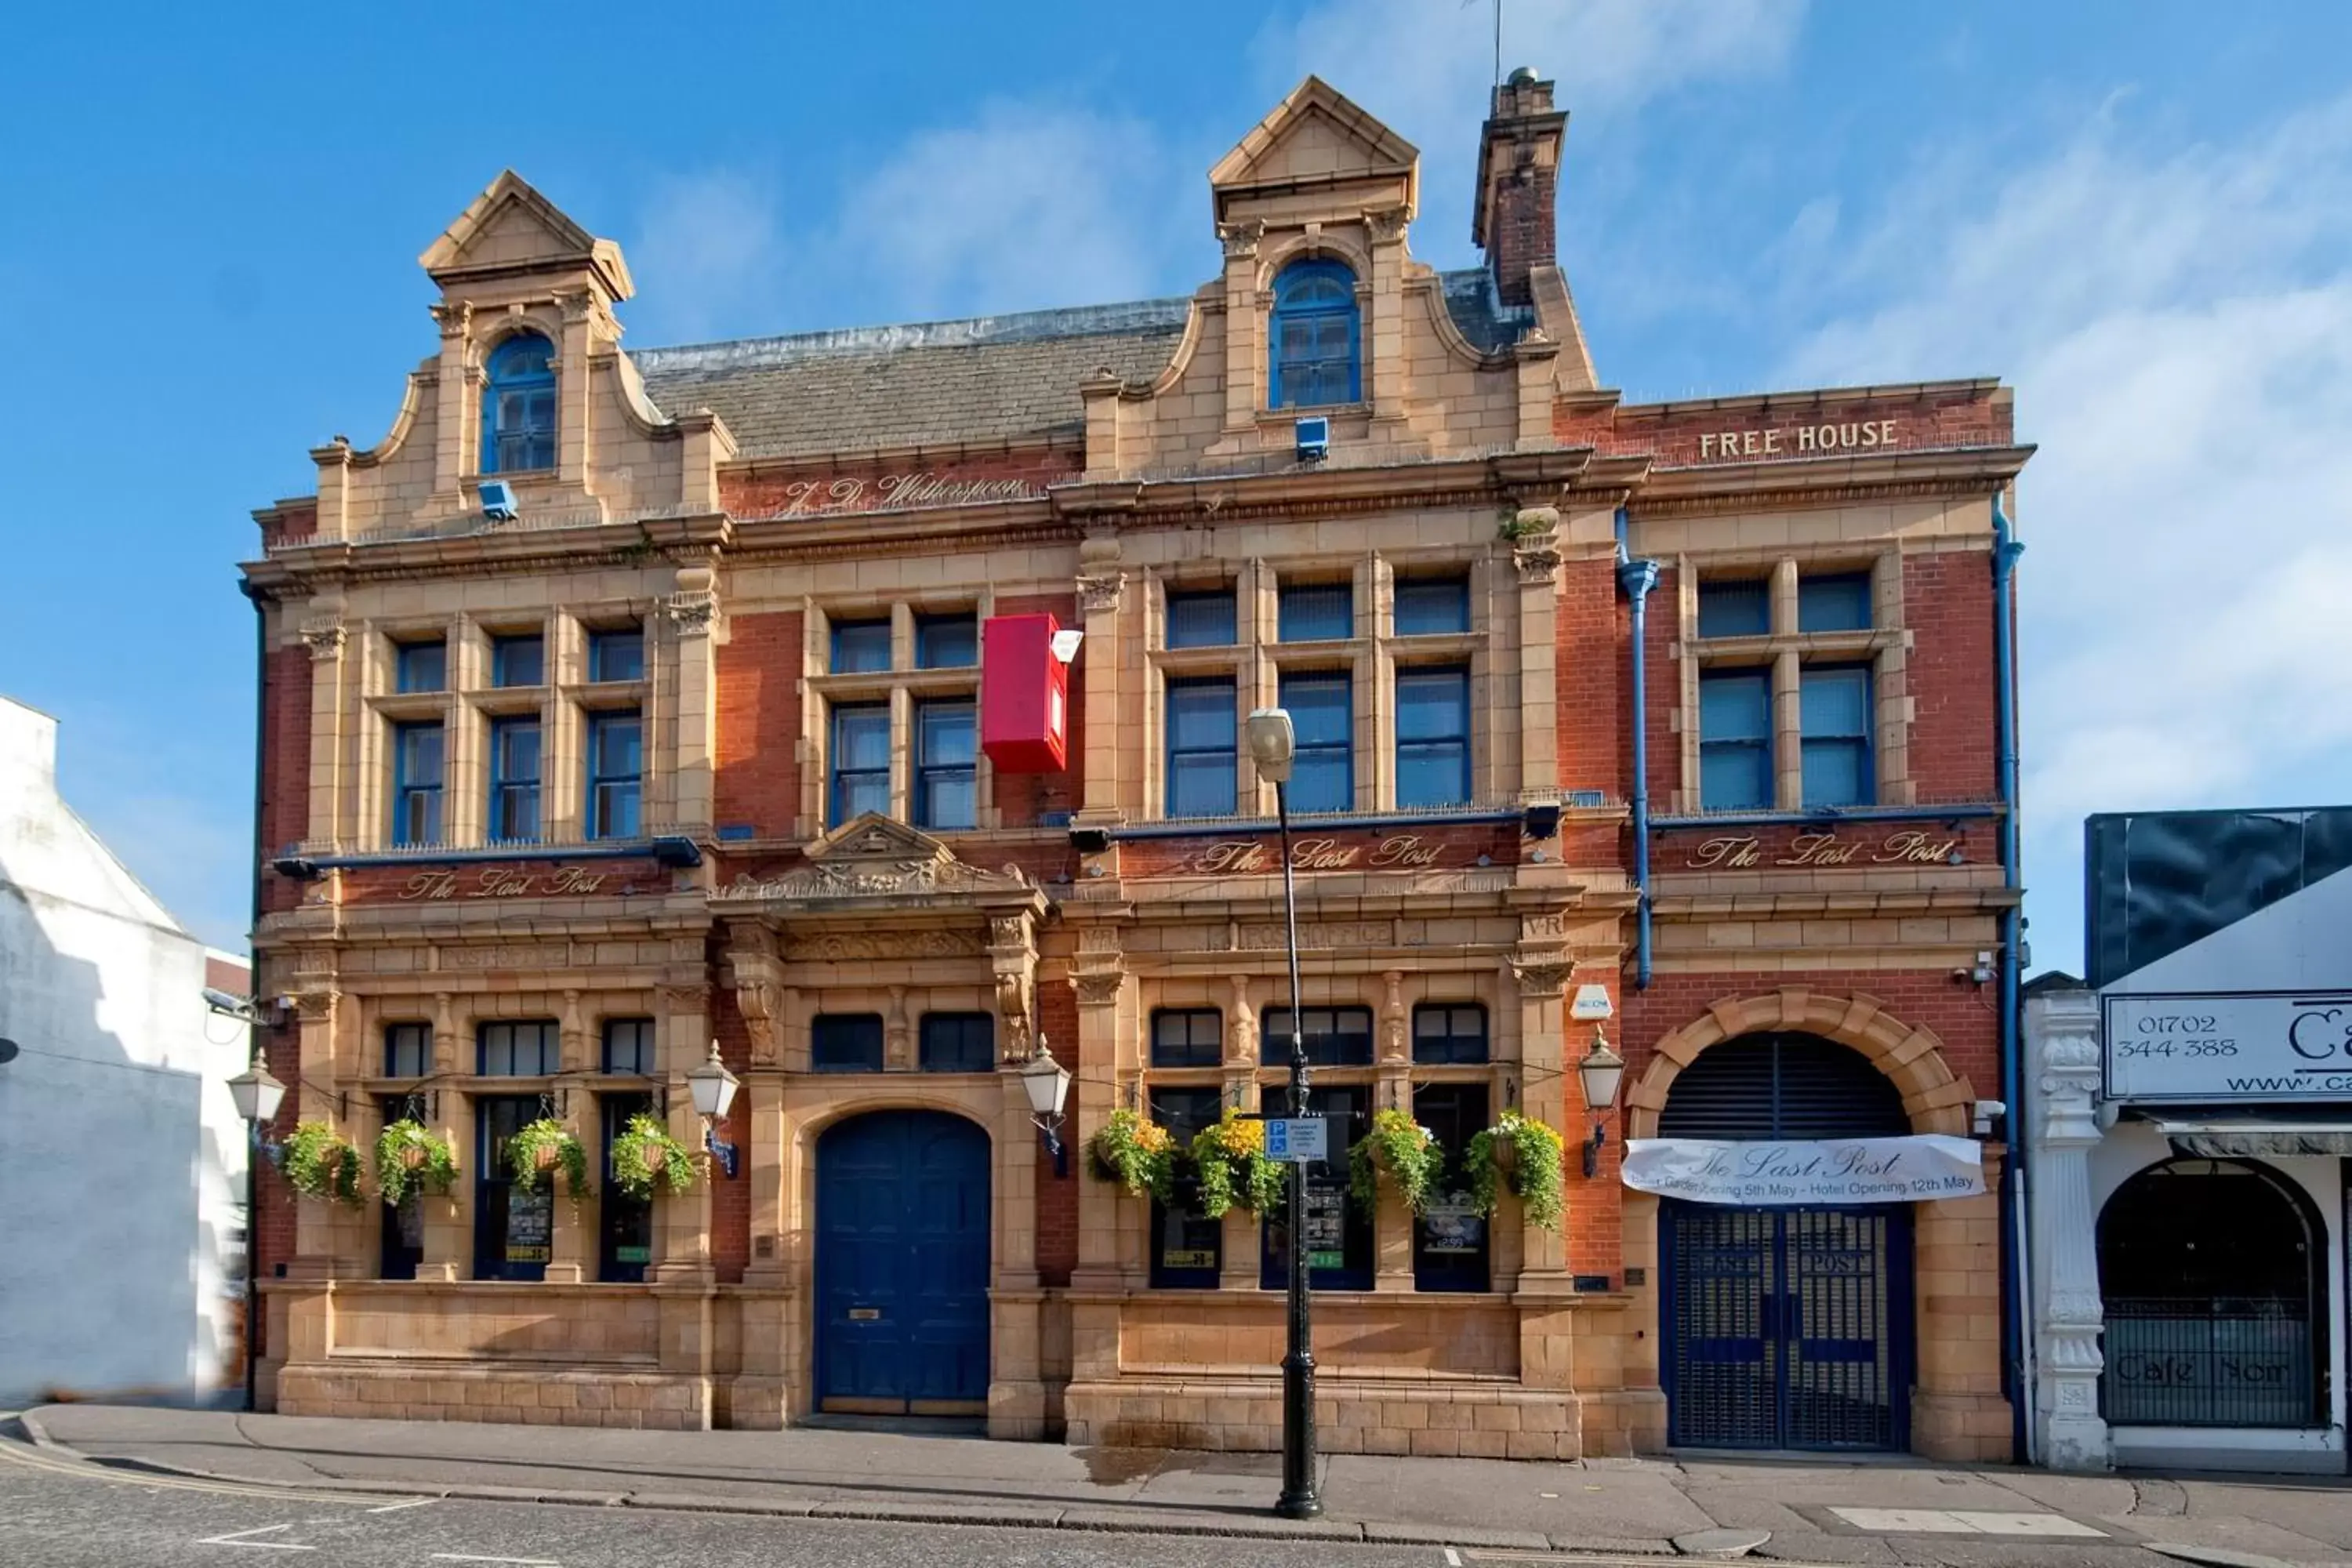 Property Building in The Last Post Wetherspoon Hotel